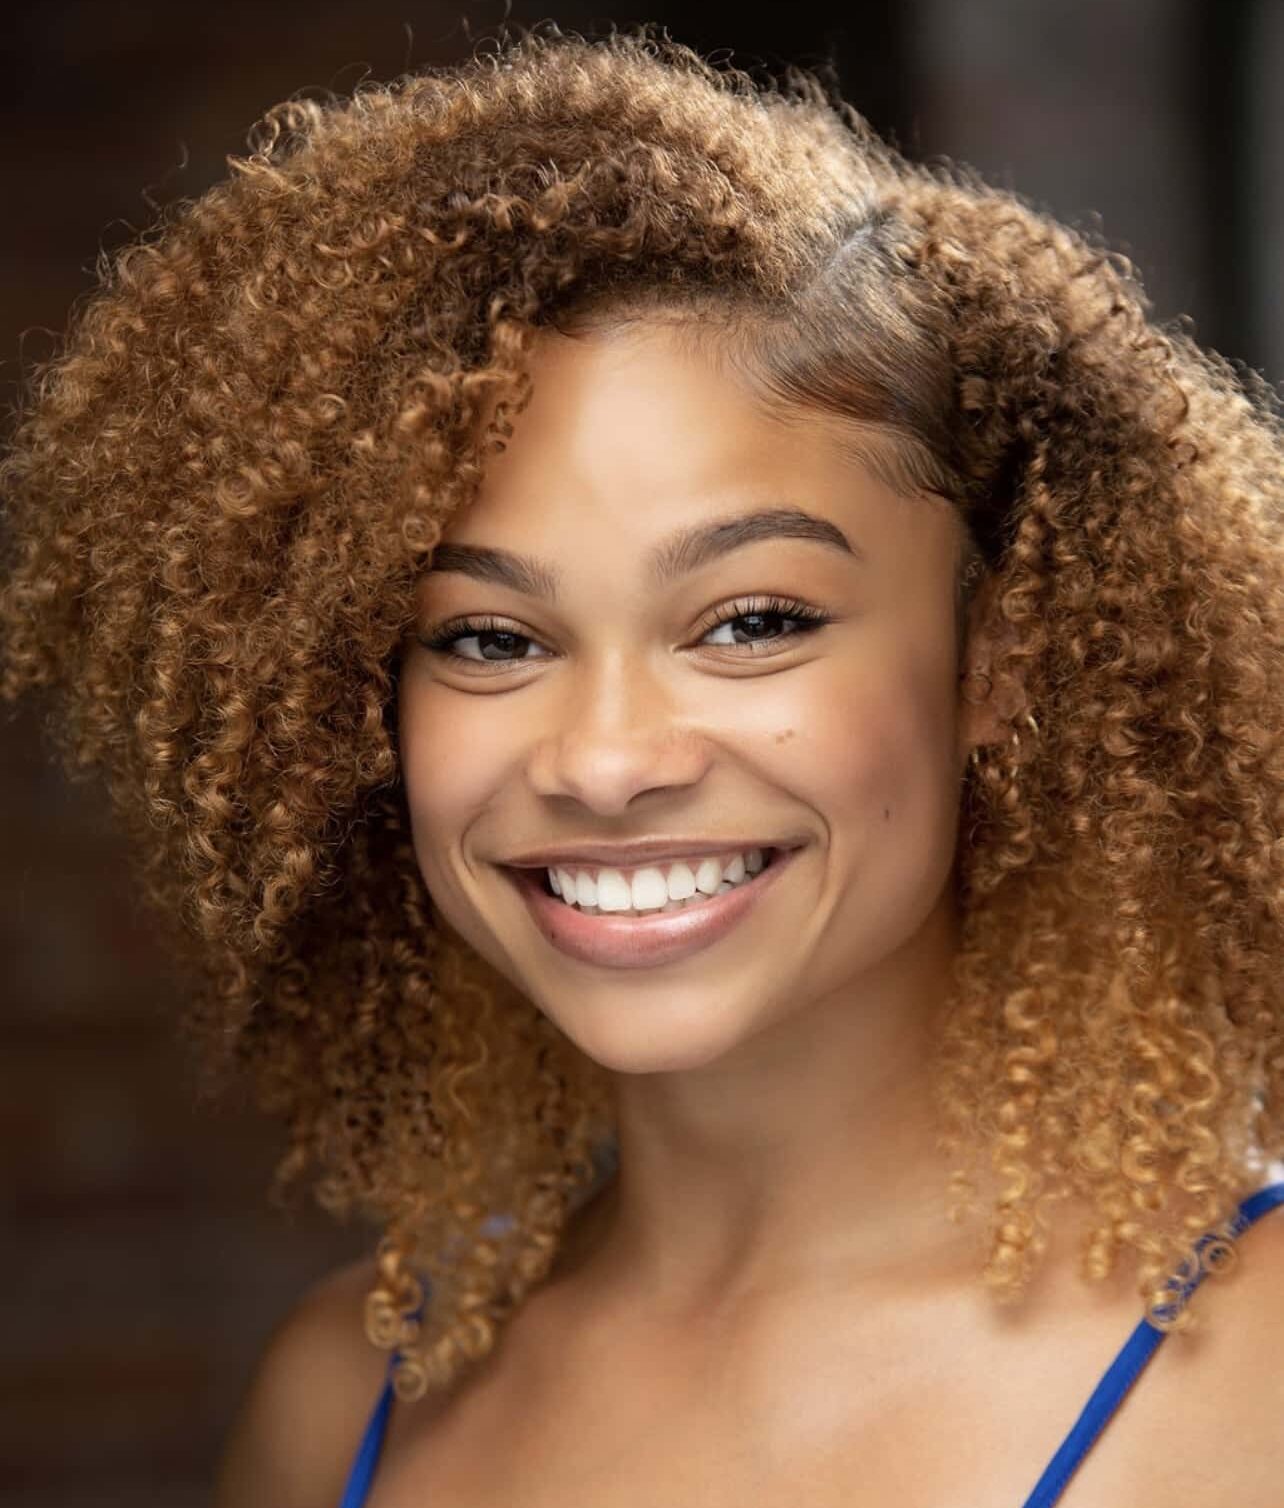 Dasia Amos made Broadway debut as ensemble member of MJ the Musical cast